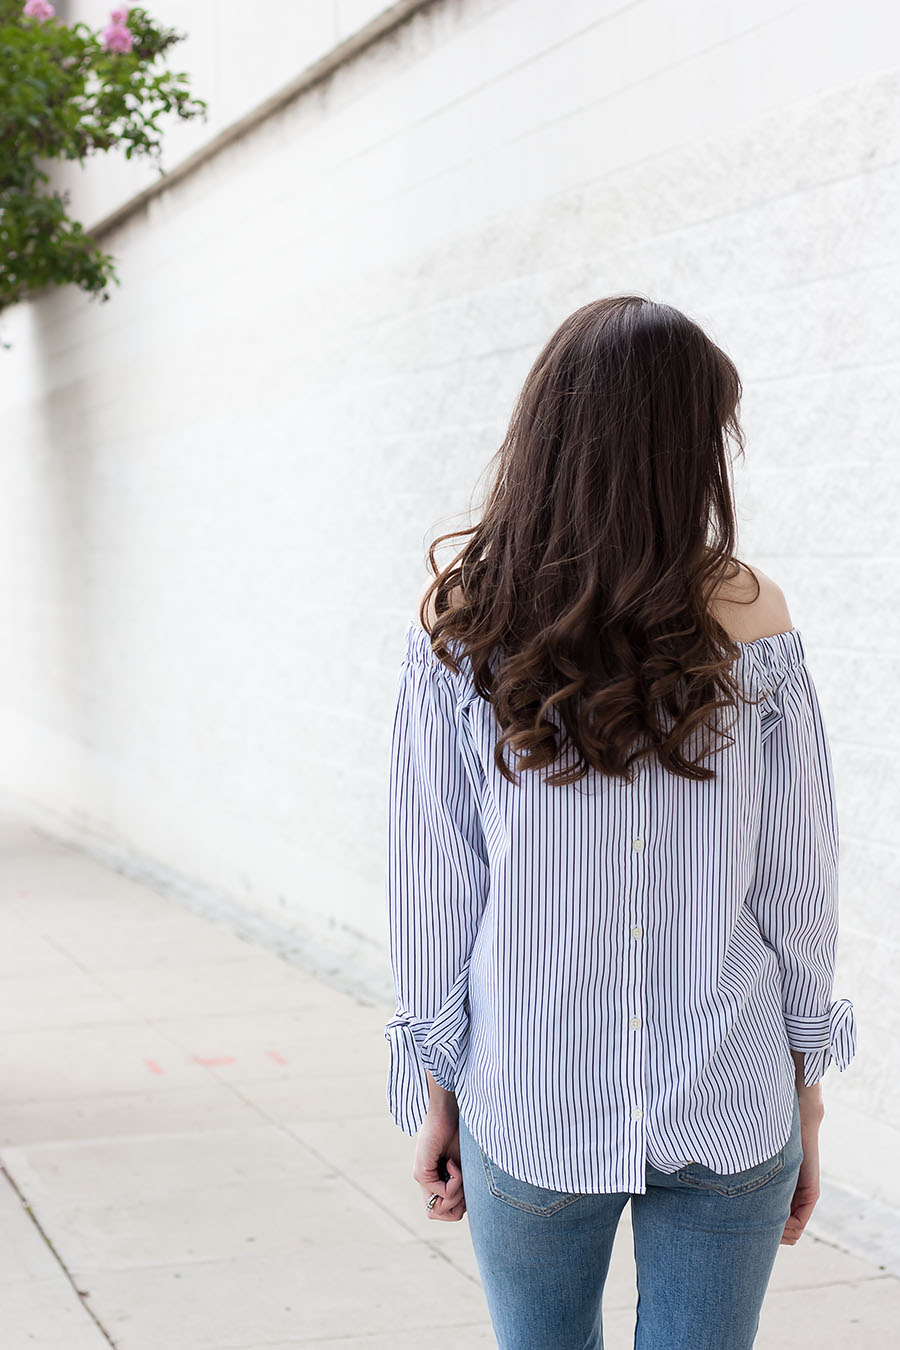 Button Back Off the Shoulder Top, Long Hair, Long Hairstyle, Banana Republic